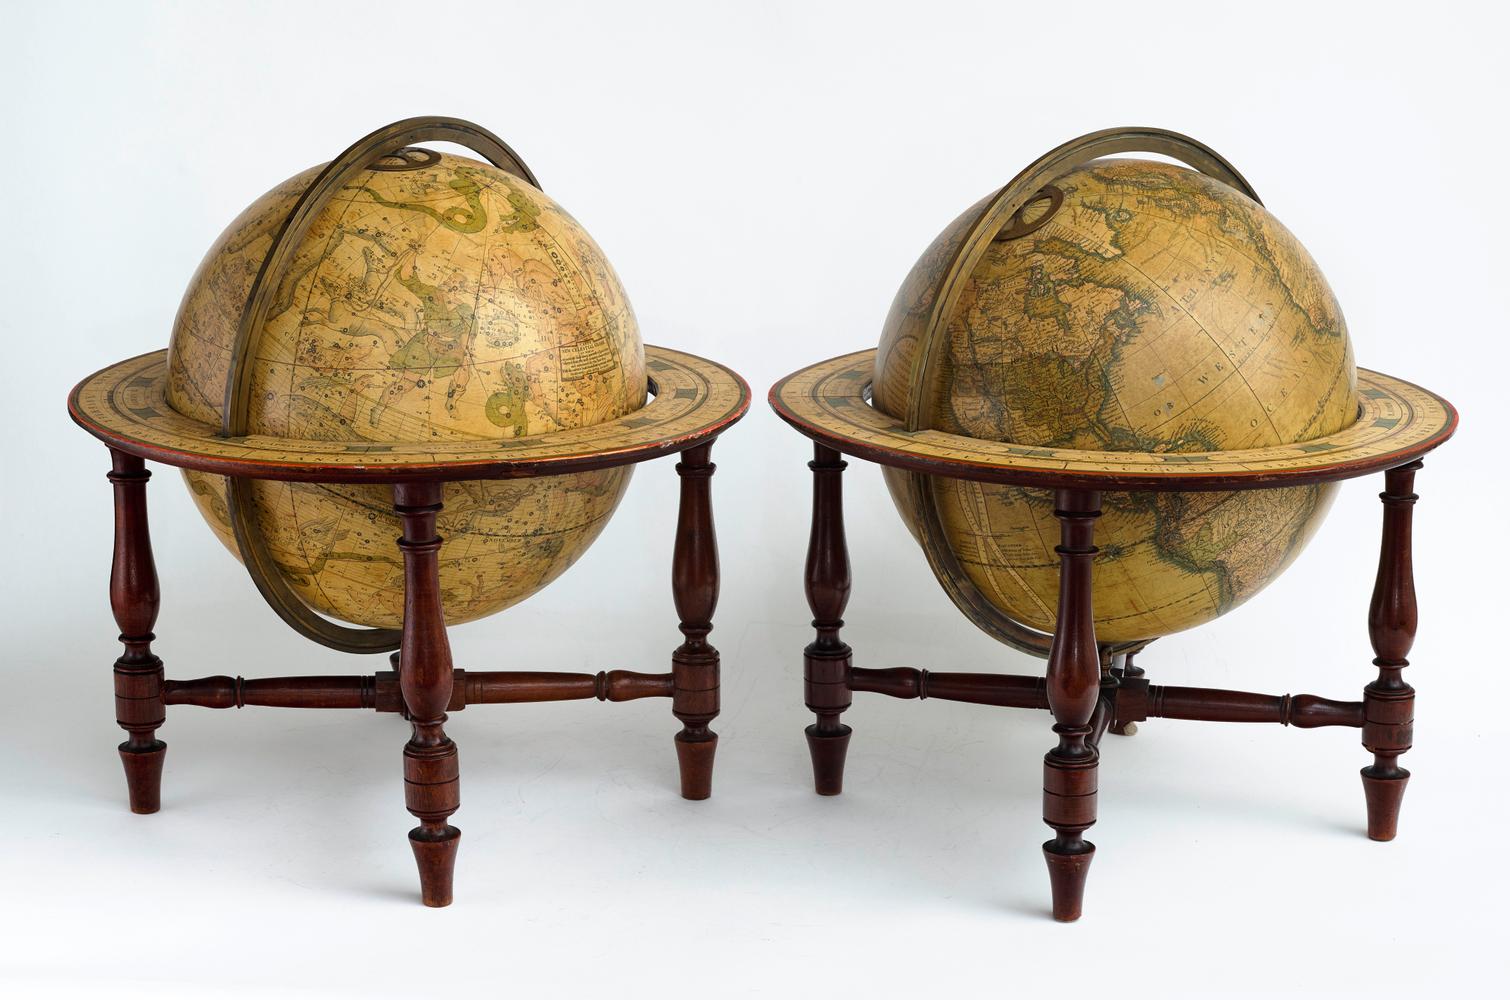 [19TH CENTURY JOHN AND WILLIAM CARY TABLE GLOBES] Earth and sky globe by J.&W. Cary, Regency, London